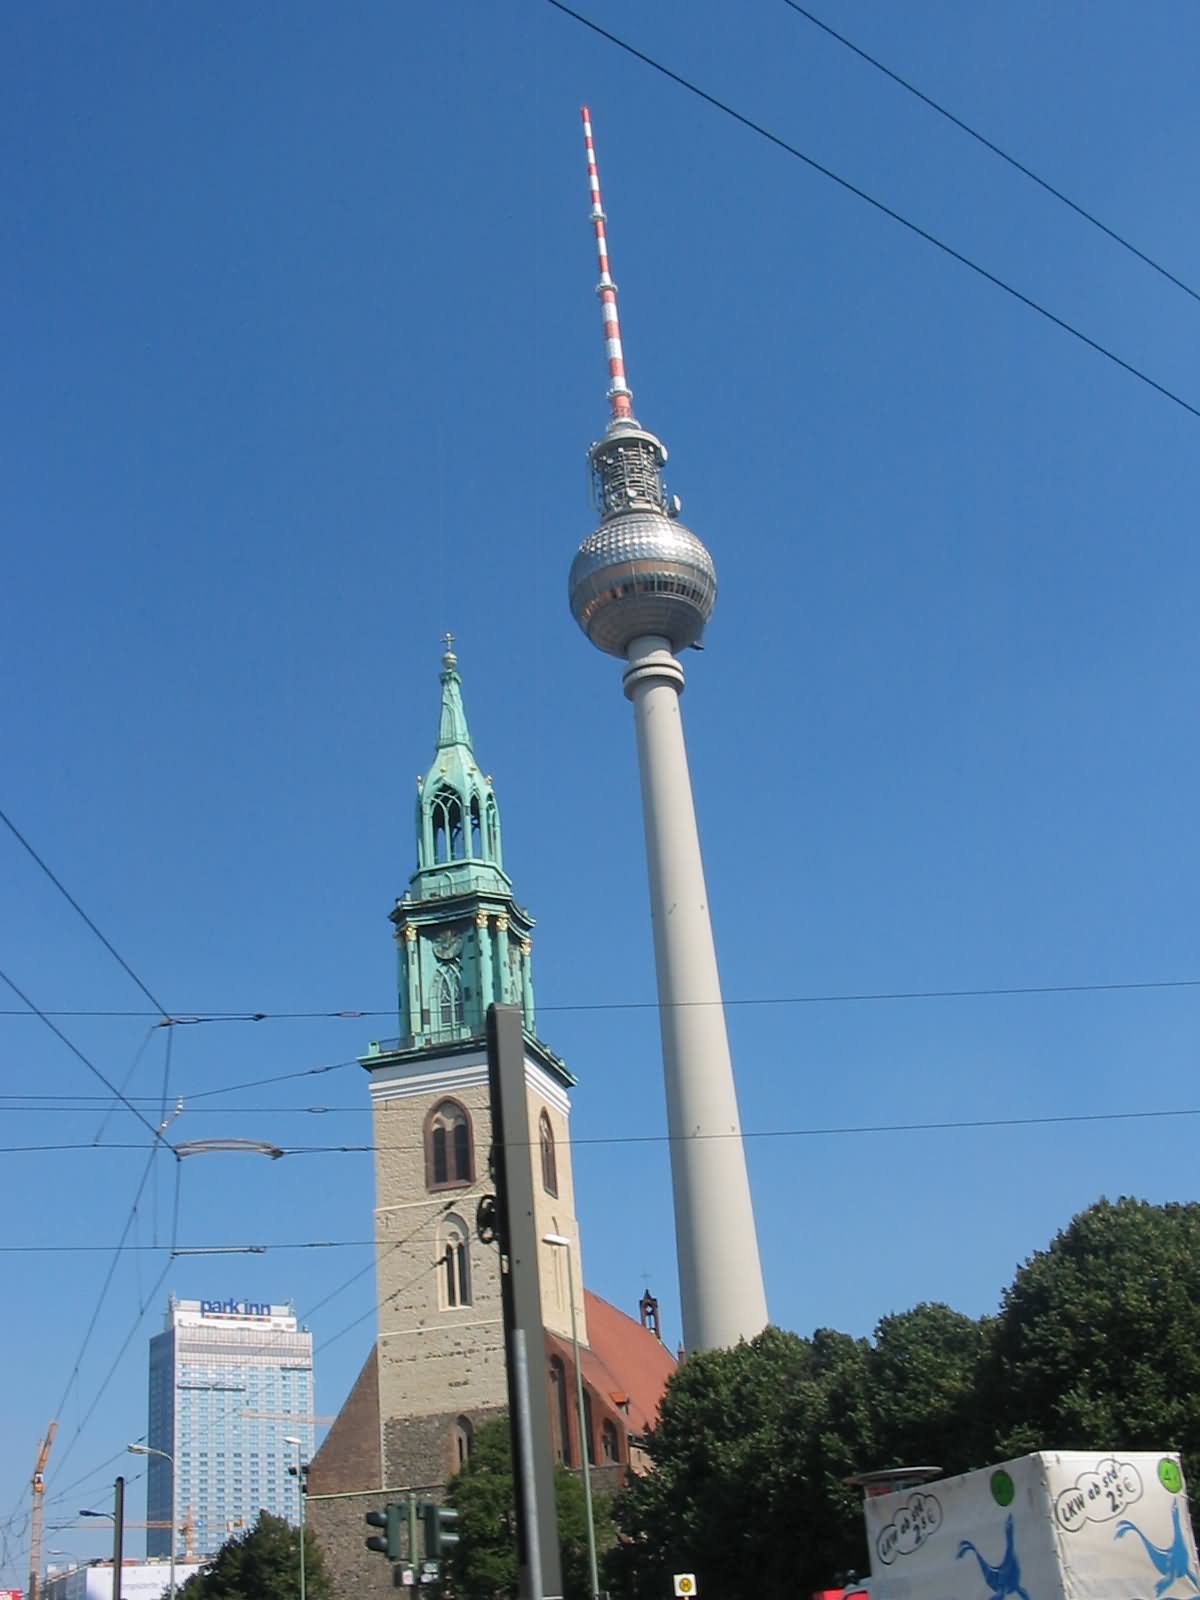 The Fernsehturm Berlin Tower And Cathedral View Image